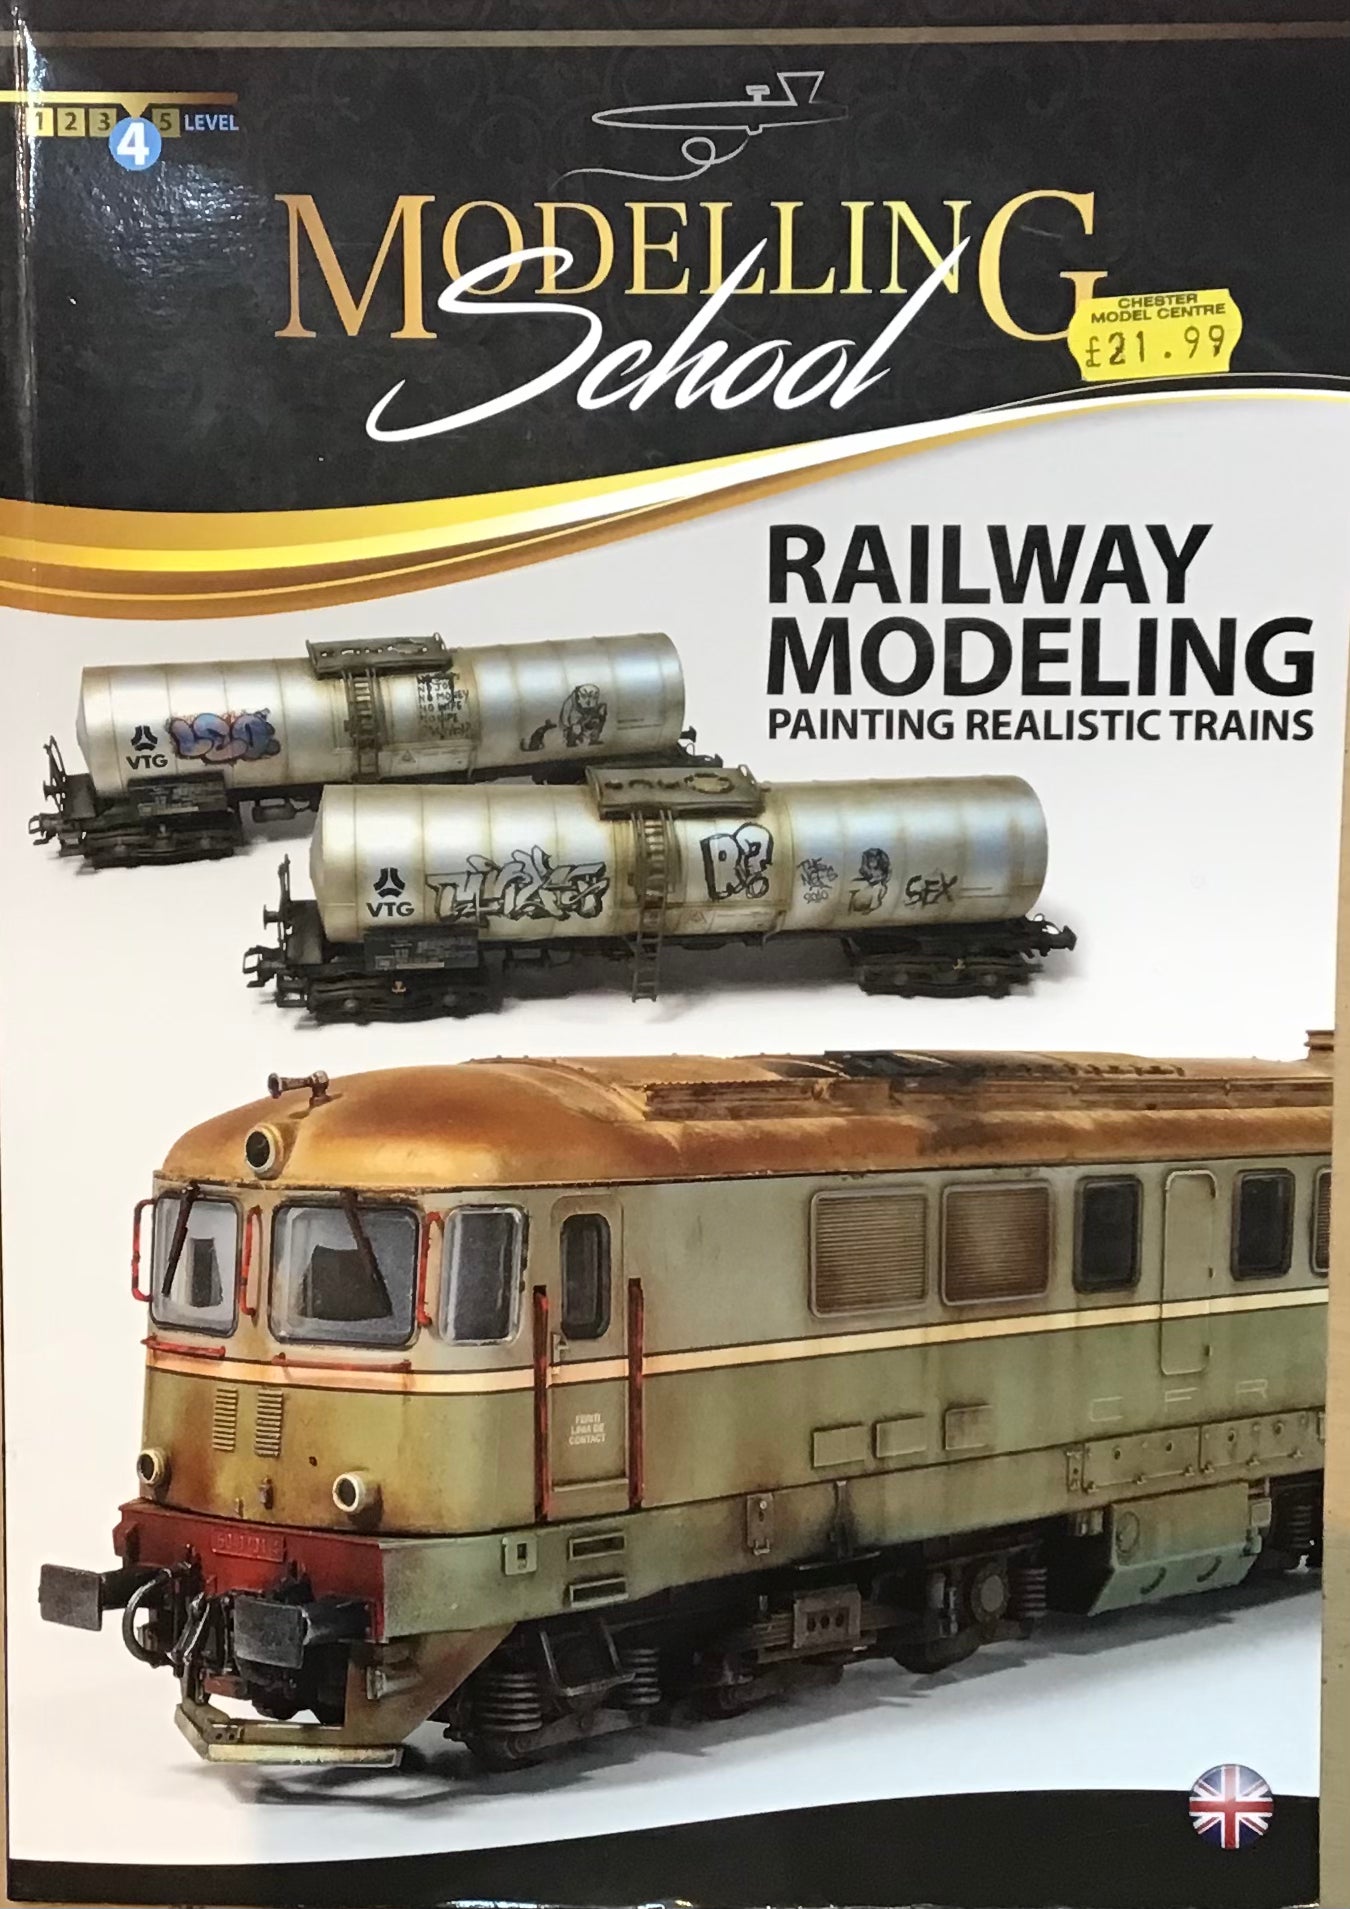 Modelling School: Railway Modeling Painting- Painting Realistic Trains - Chester Model Centre